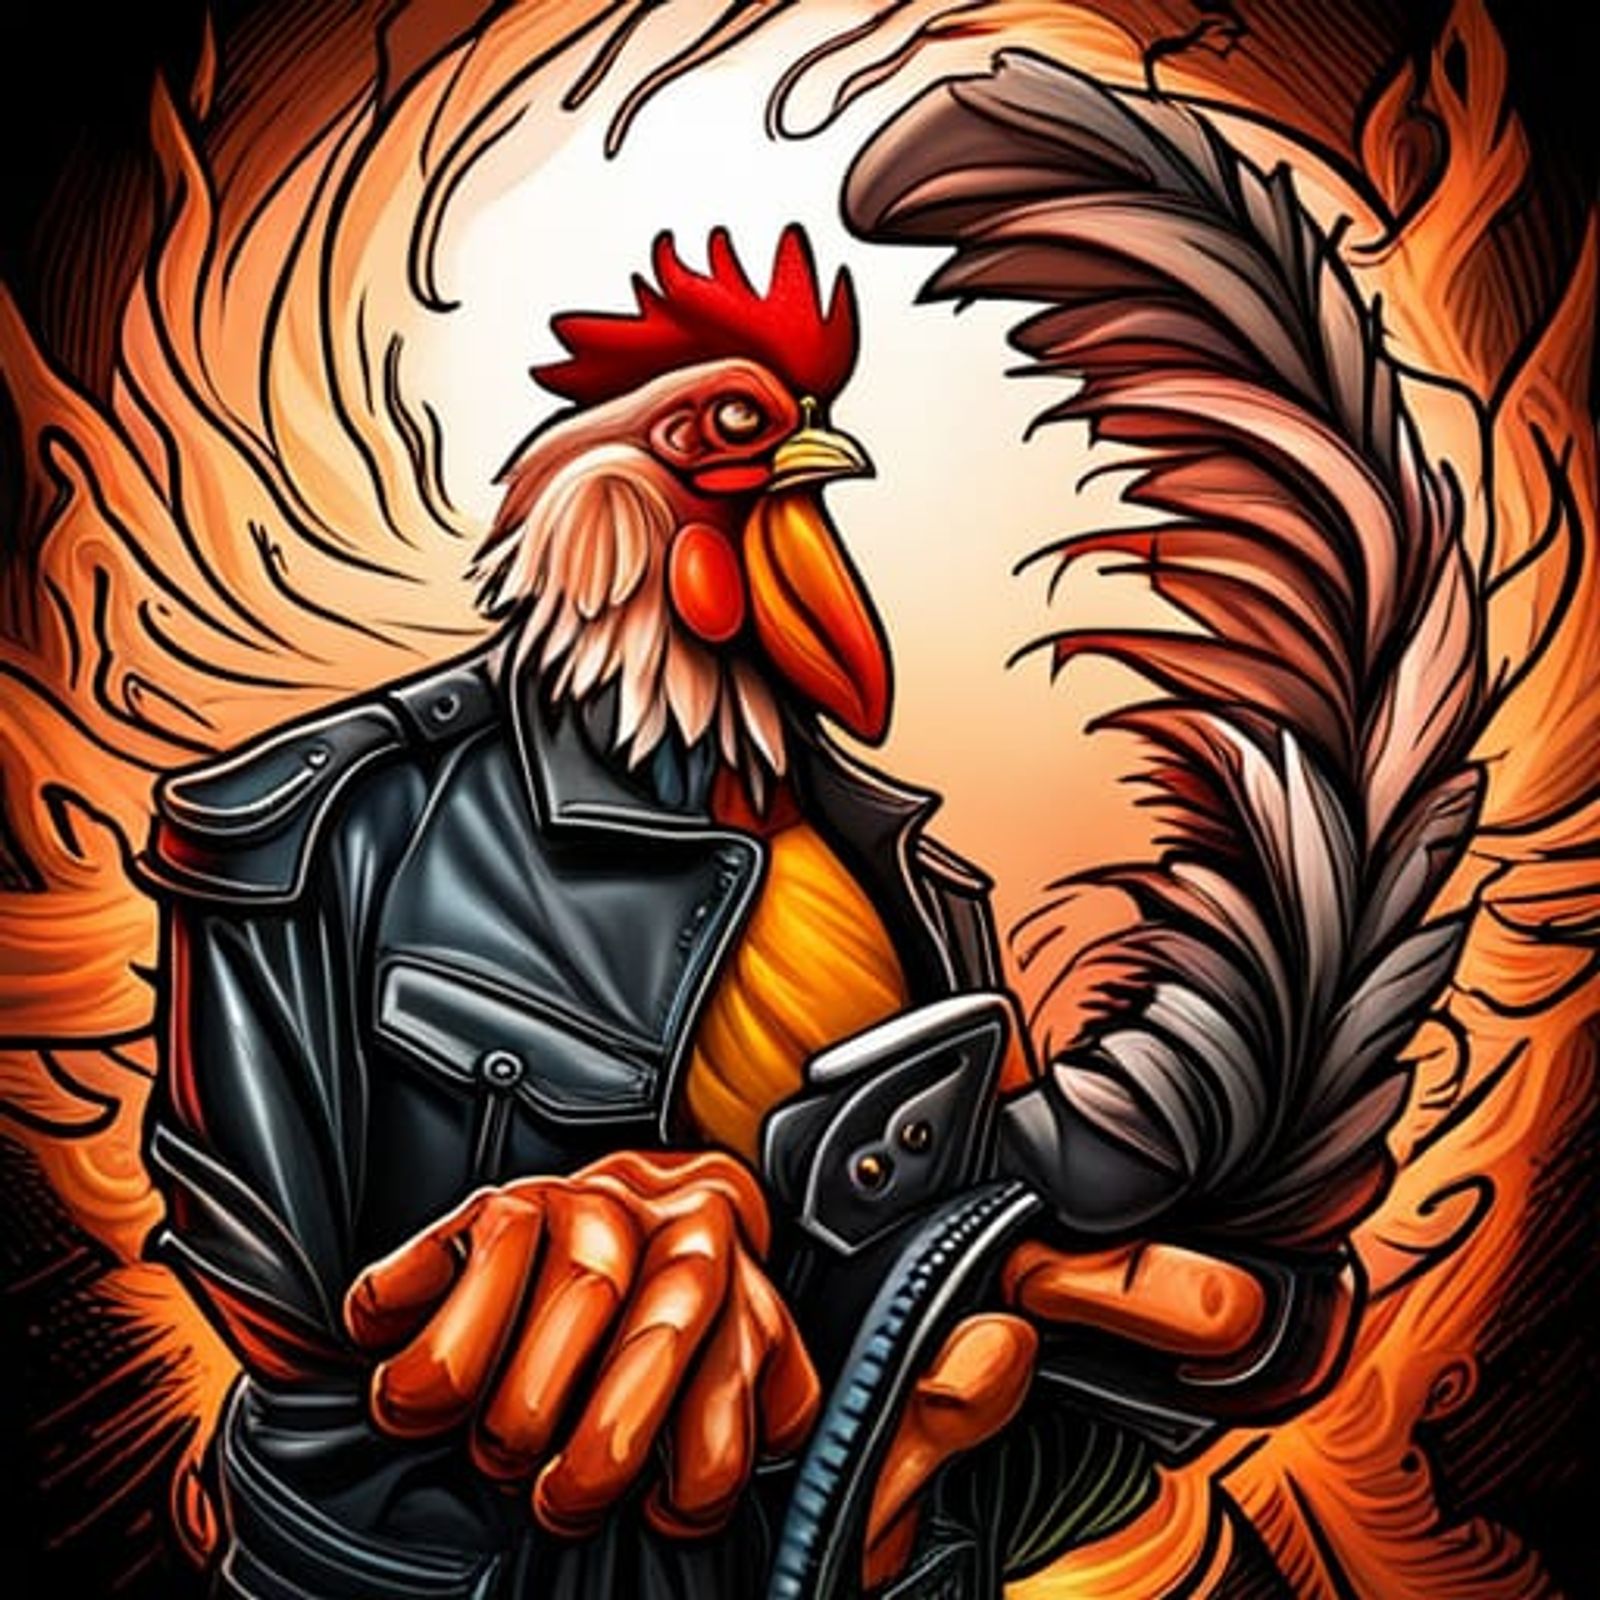 angry rooster cartoon